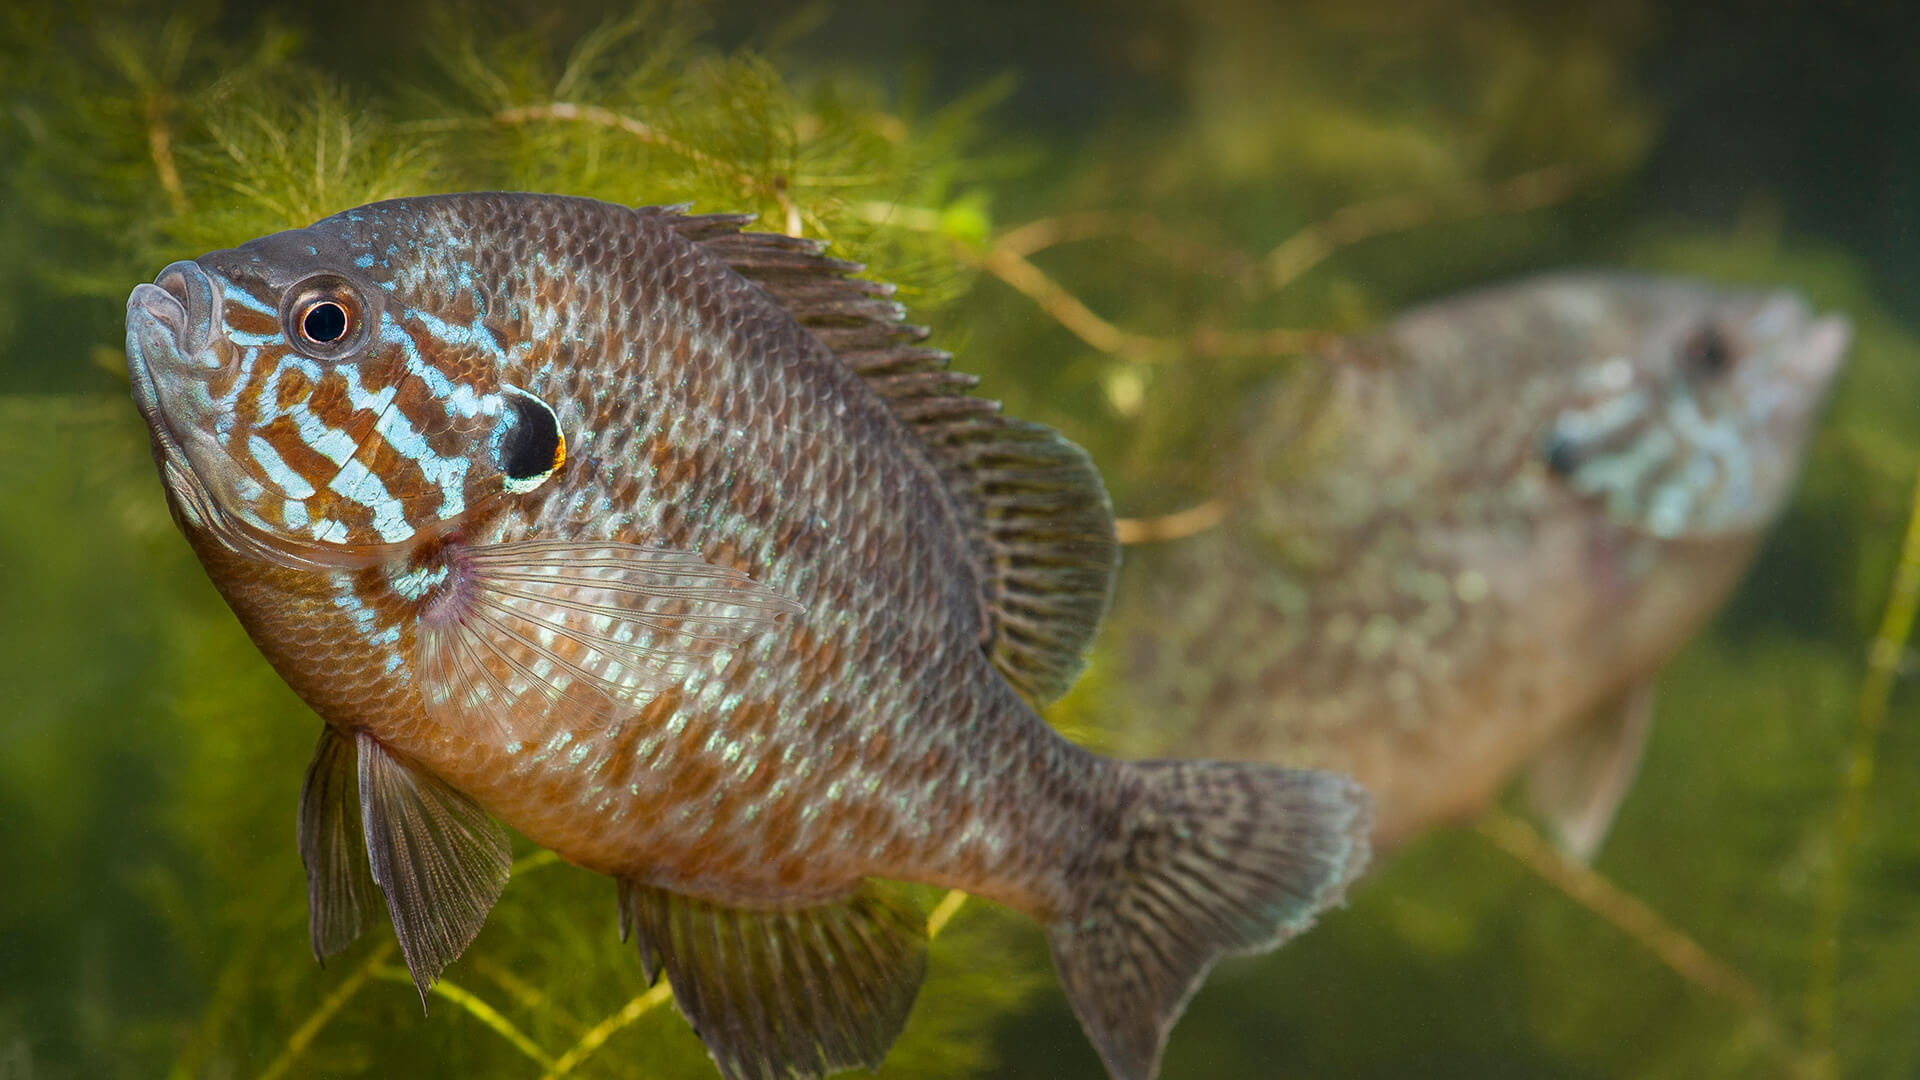 A pair of pumpkinseed sunfish under water.